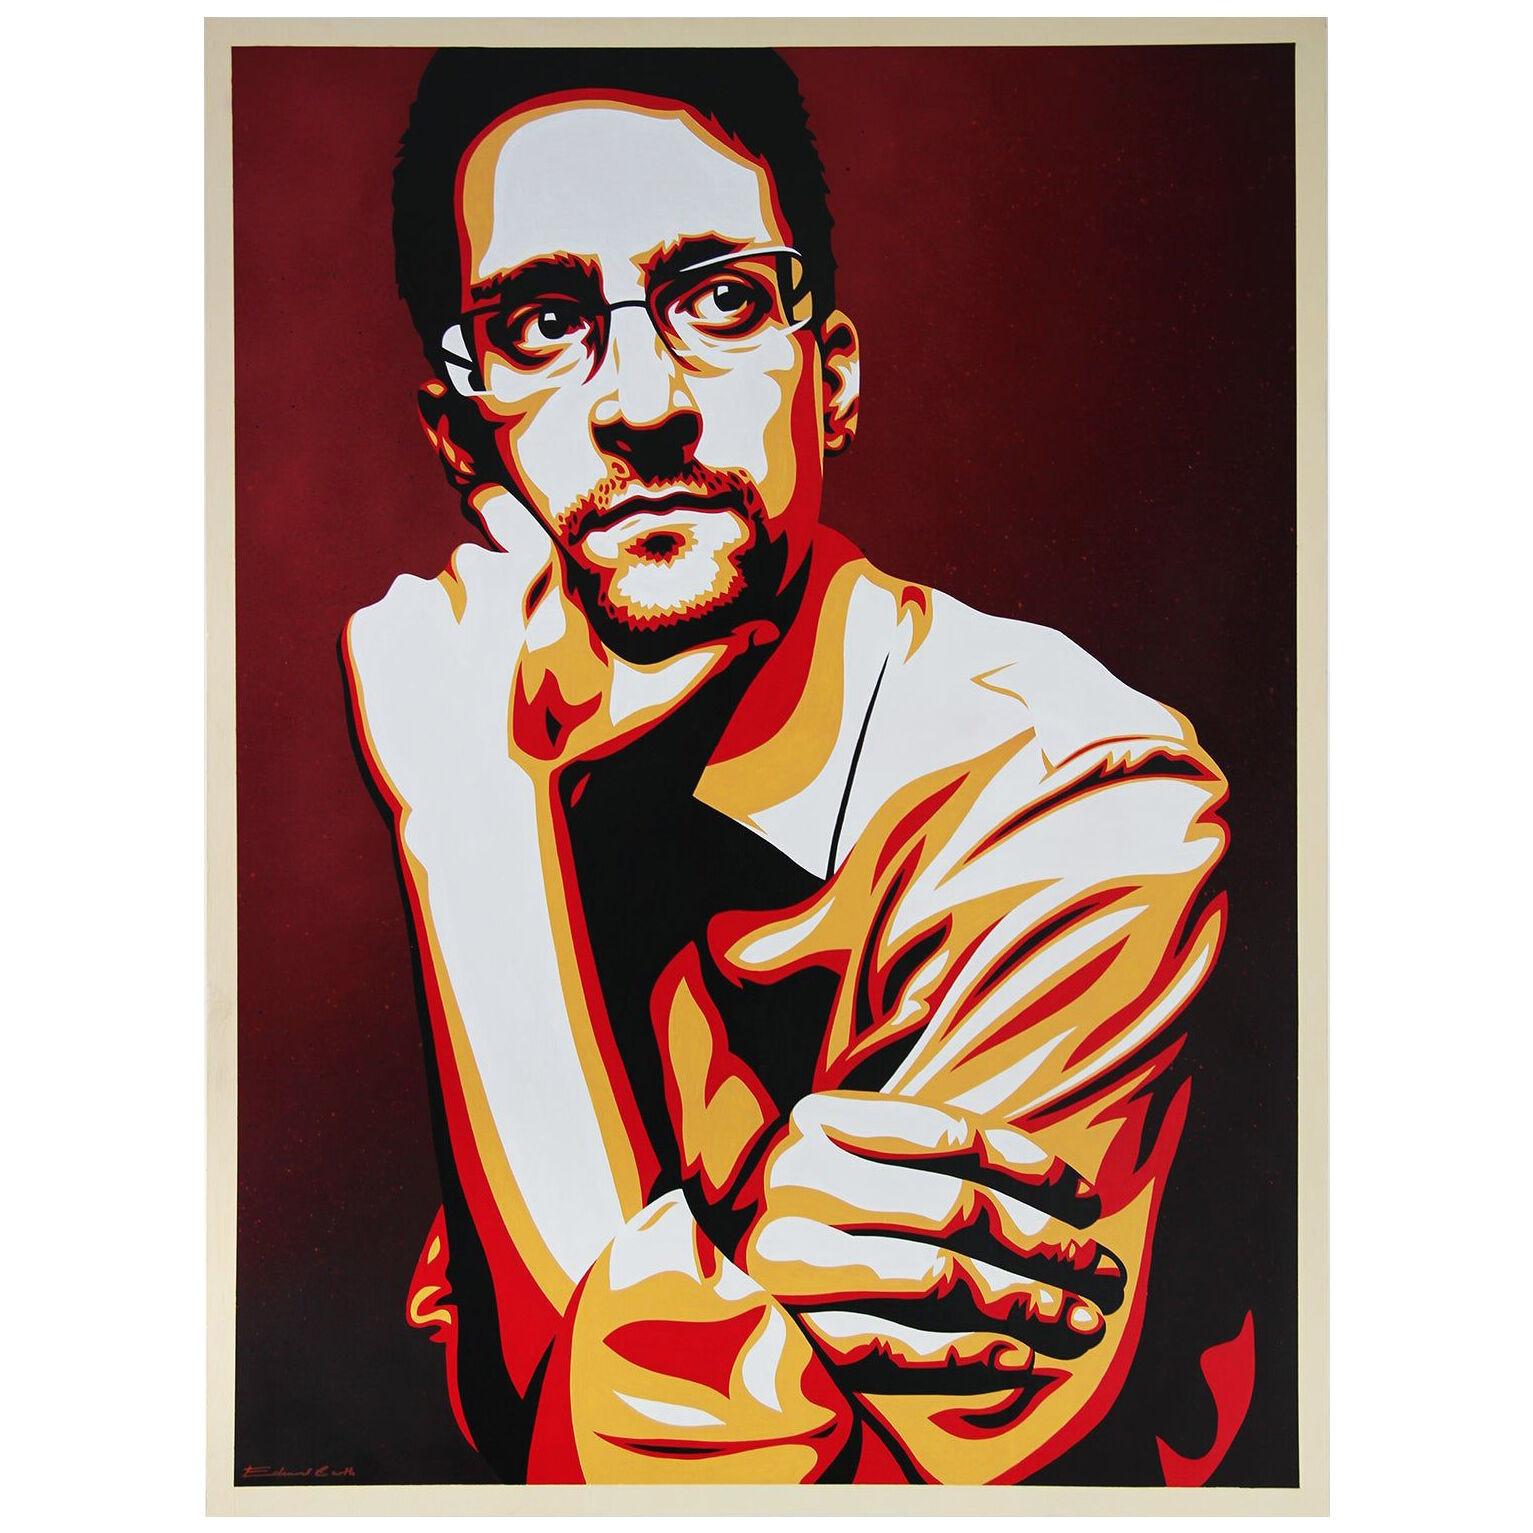 Edward Snowden “Whistleblower” Red, Orange, and Black Abstract Portrait Painting